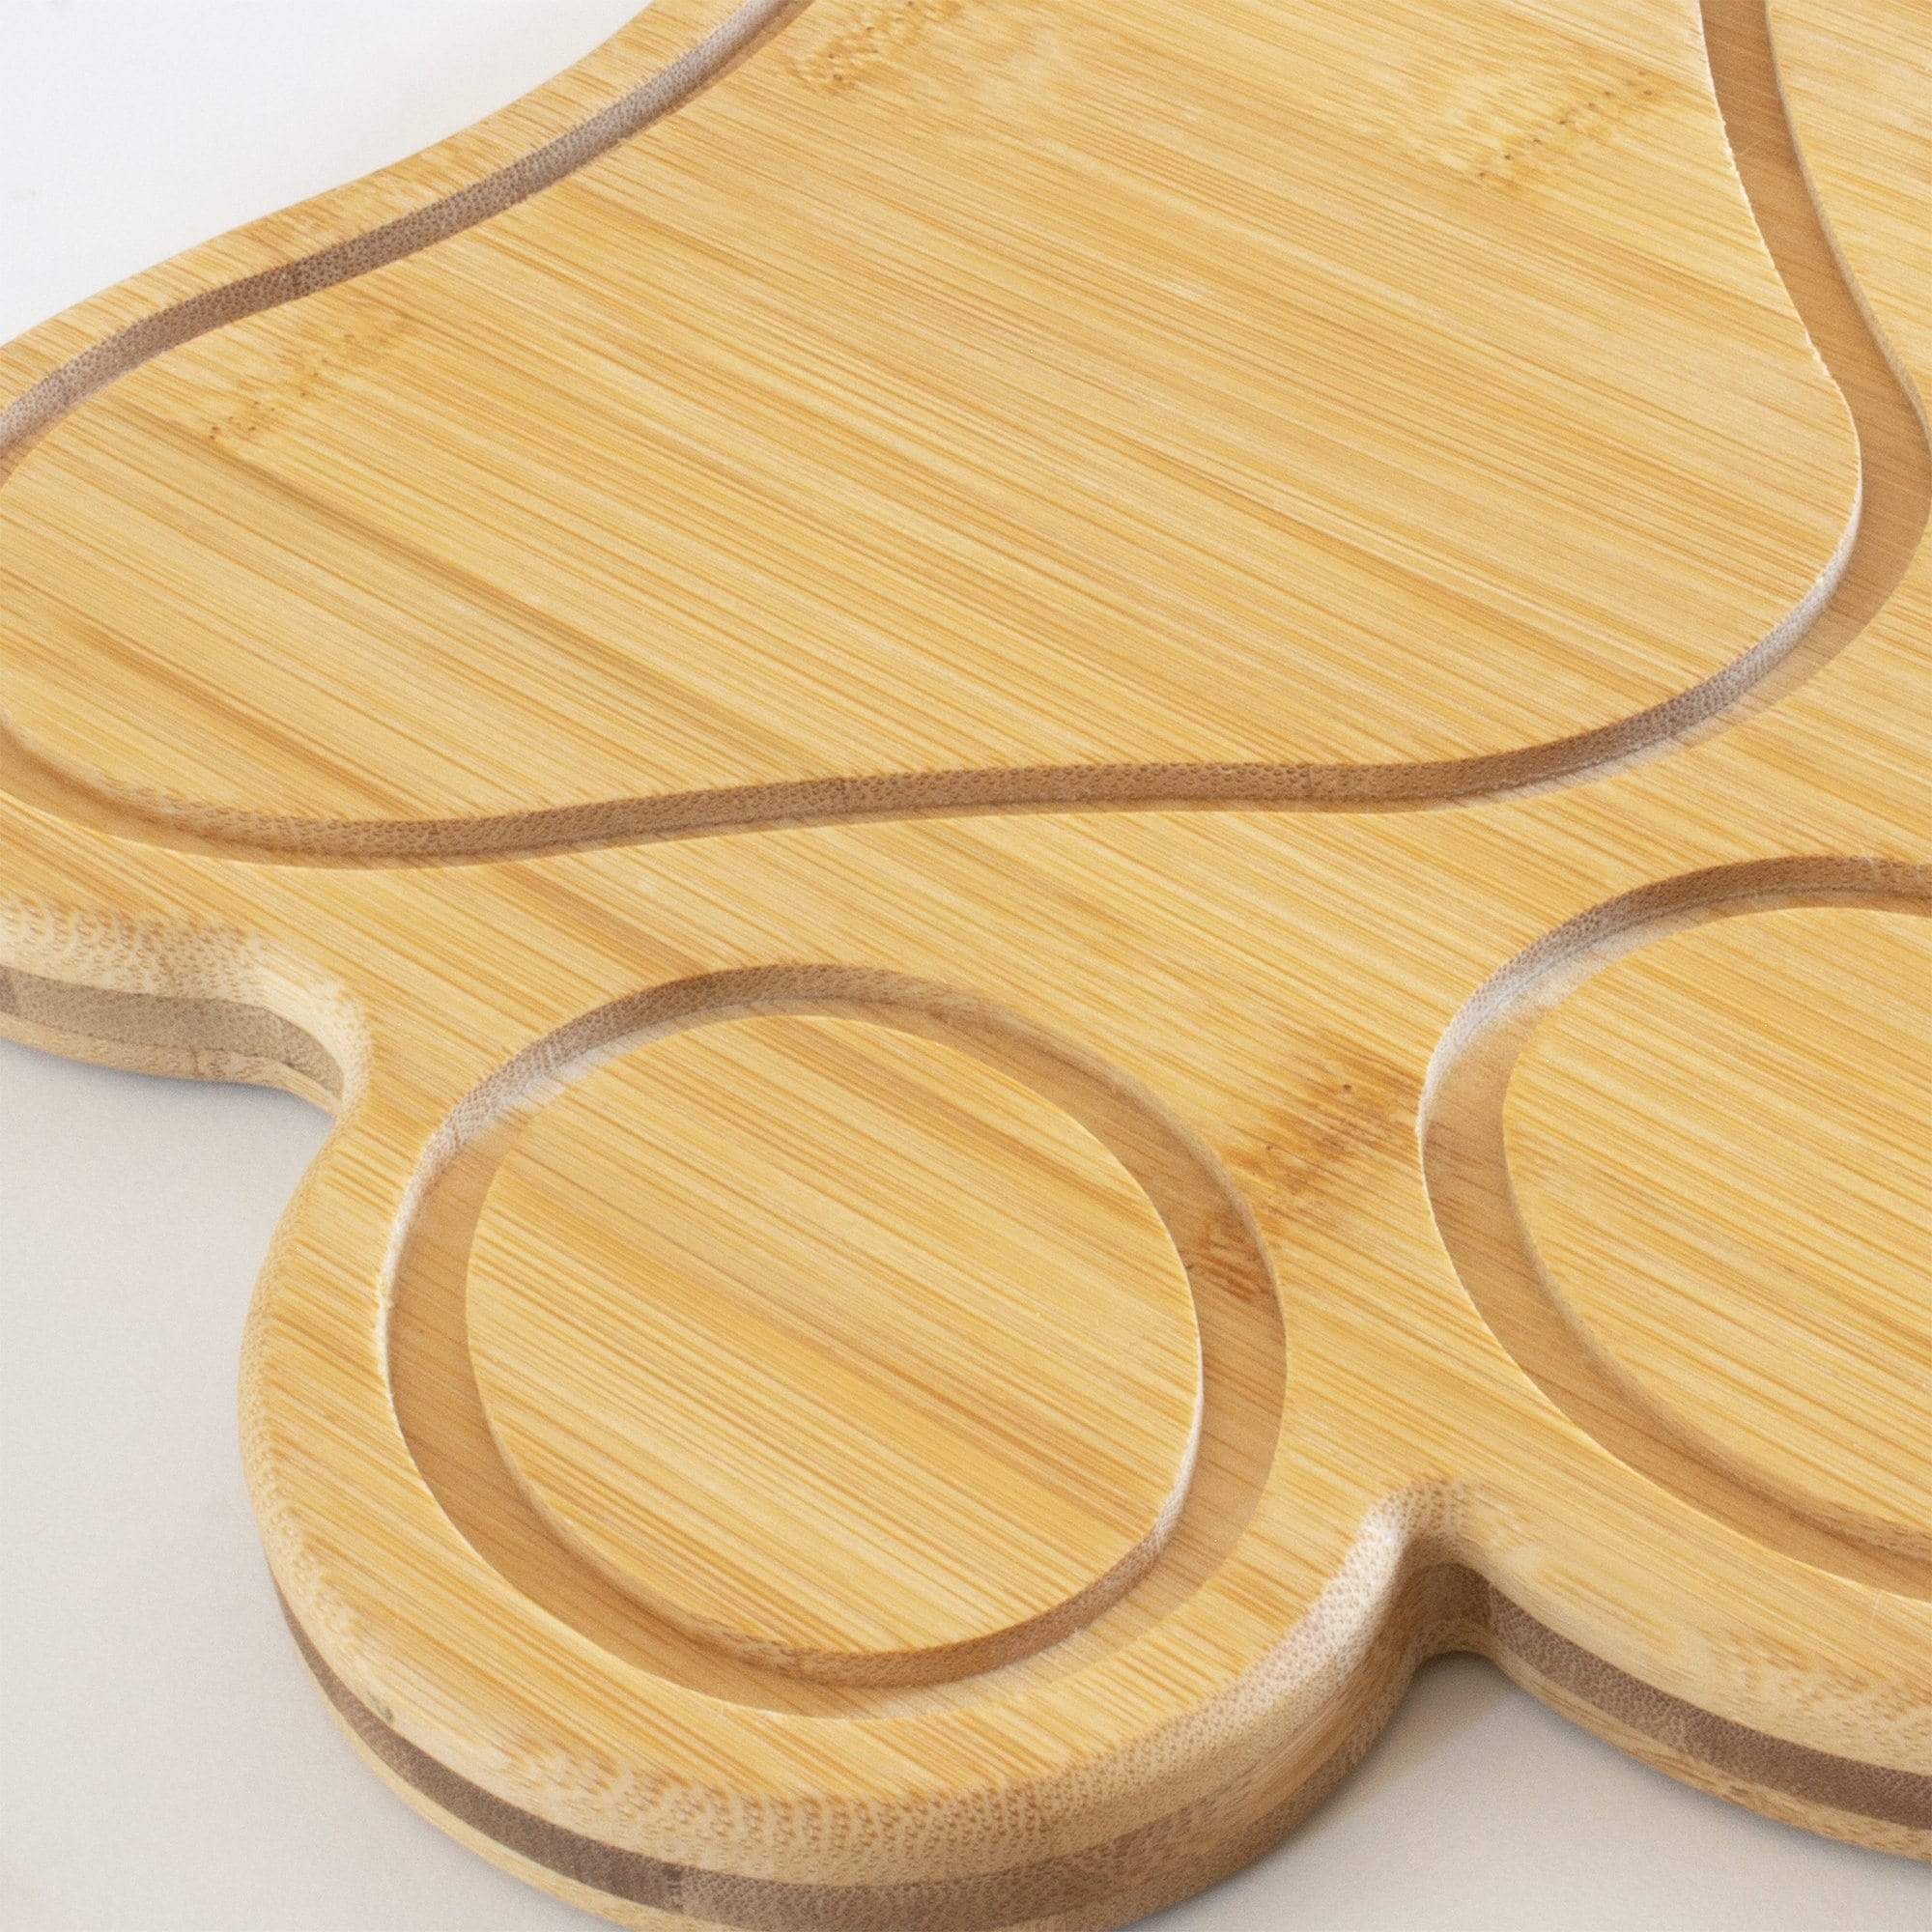 Vellum Wood Paper Composite Cutting Board by Totally Bamboo